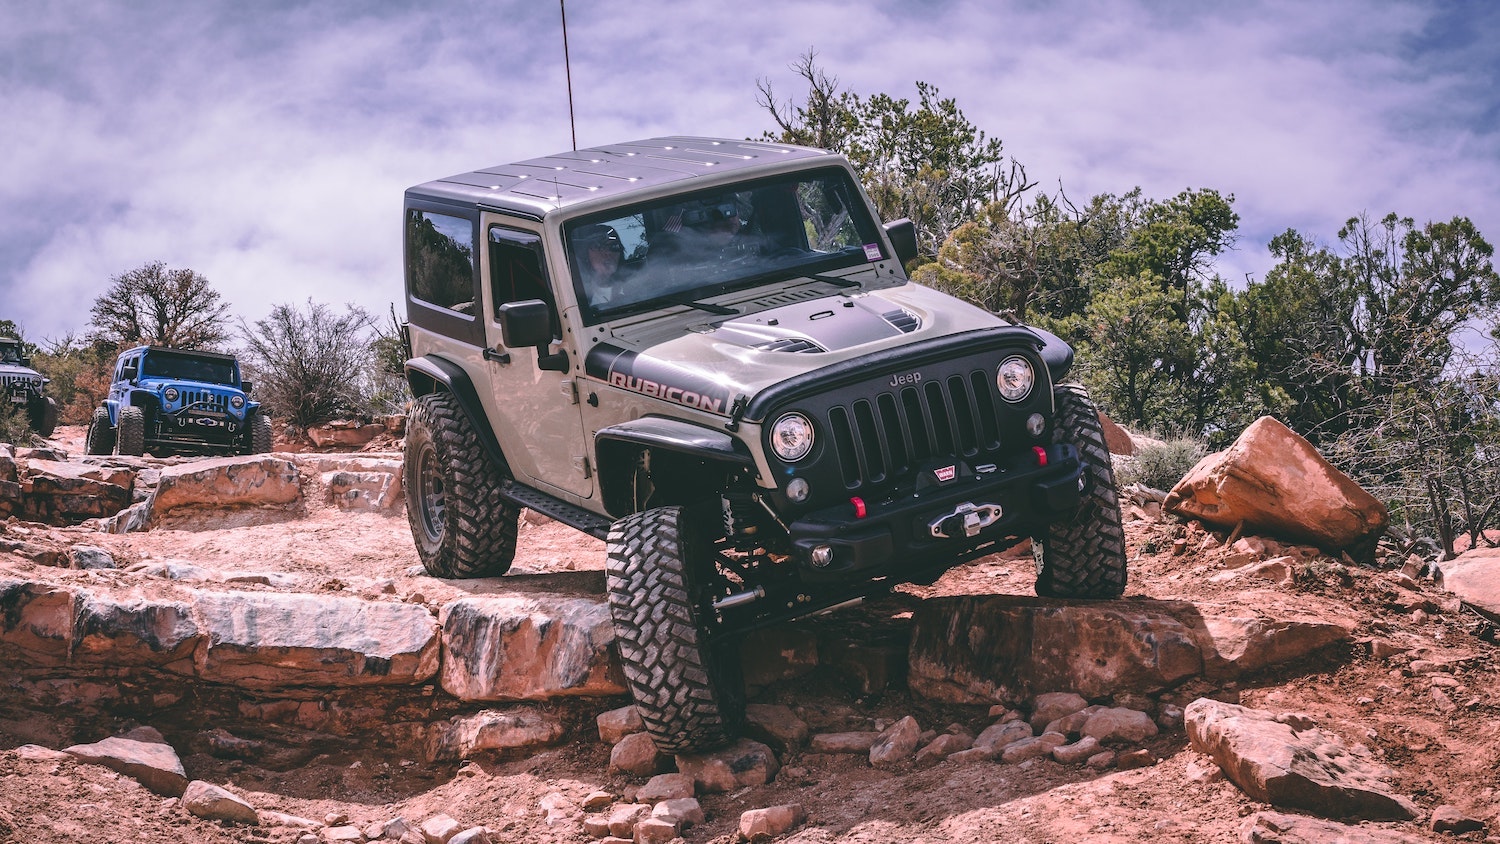 Gray Jeep Wrangler JK "Rubicon" parked in the midst of a rocky 4x4 trail.